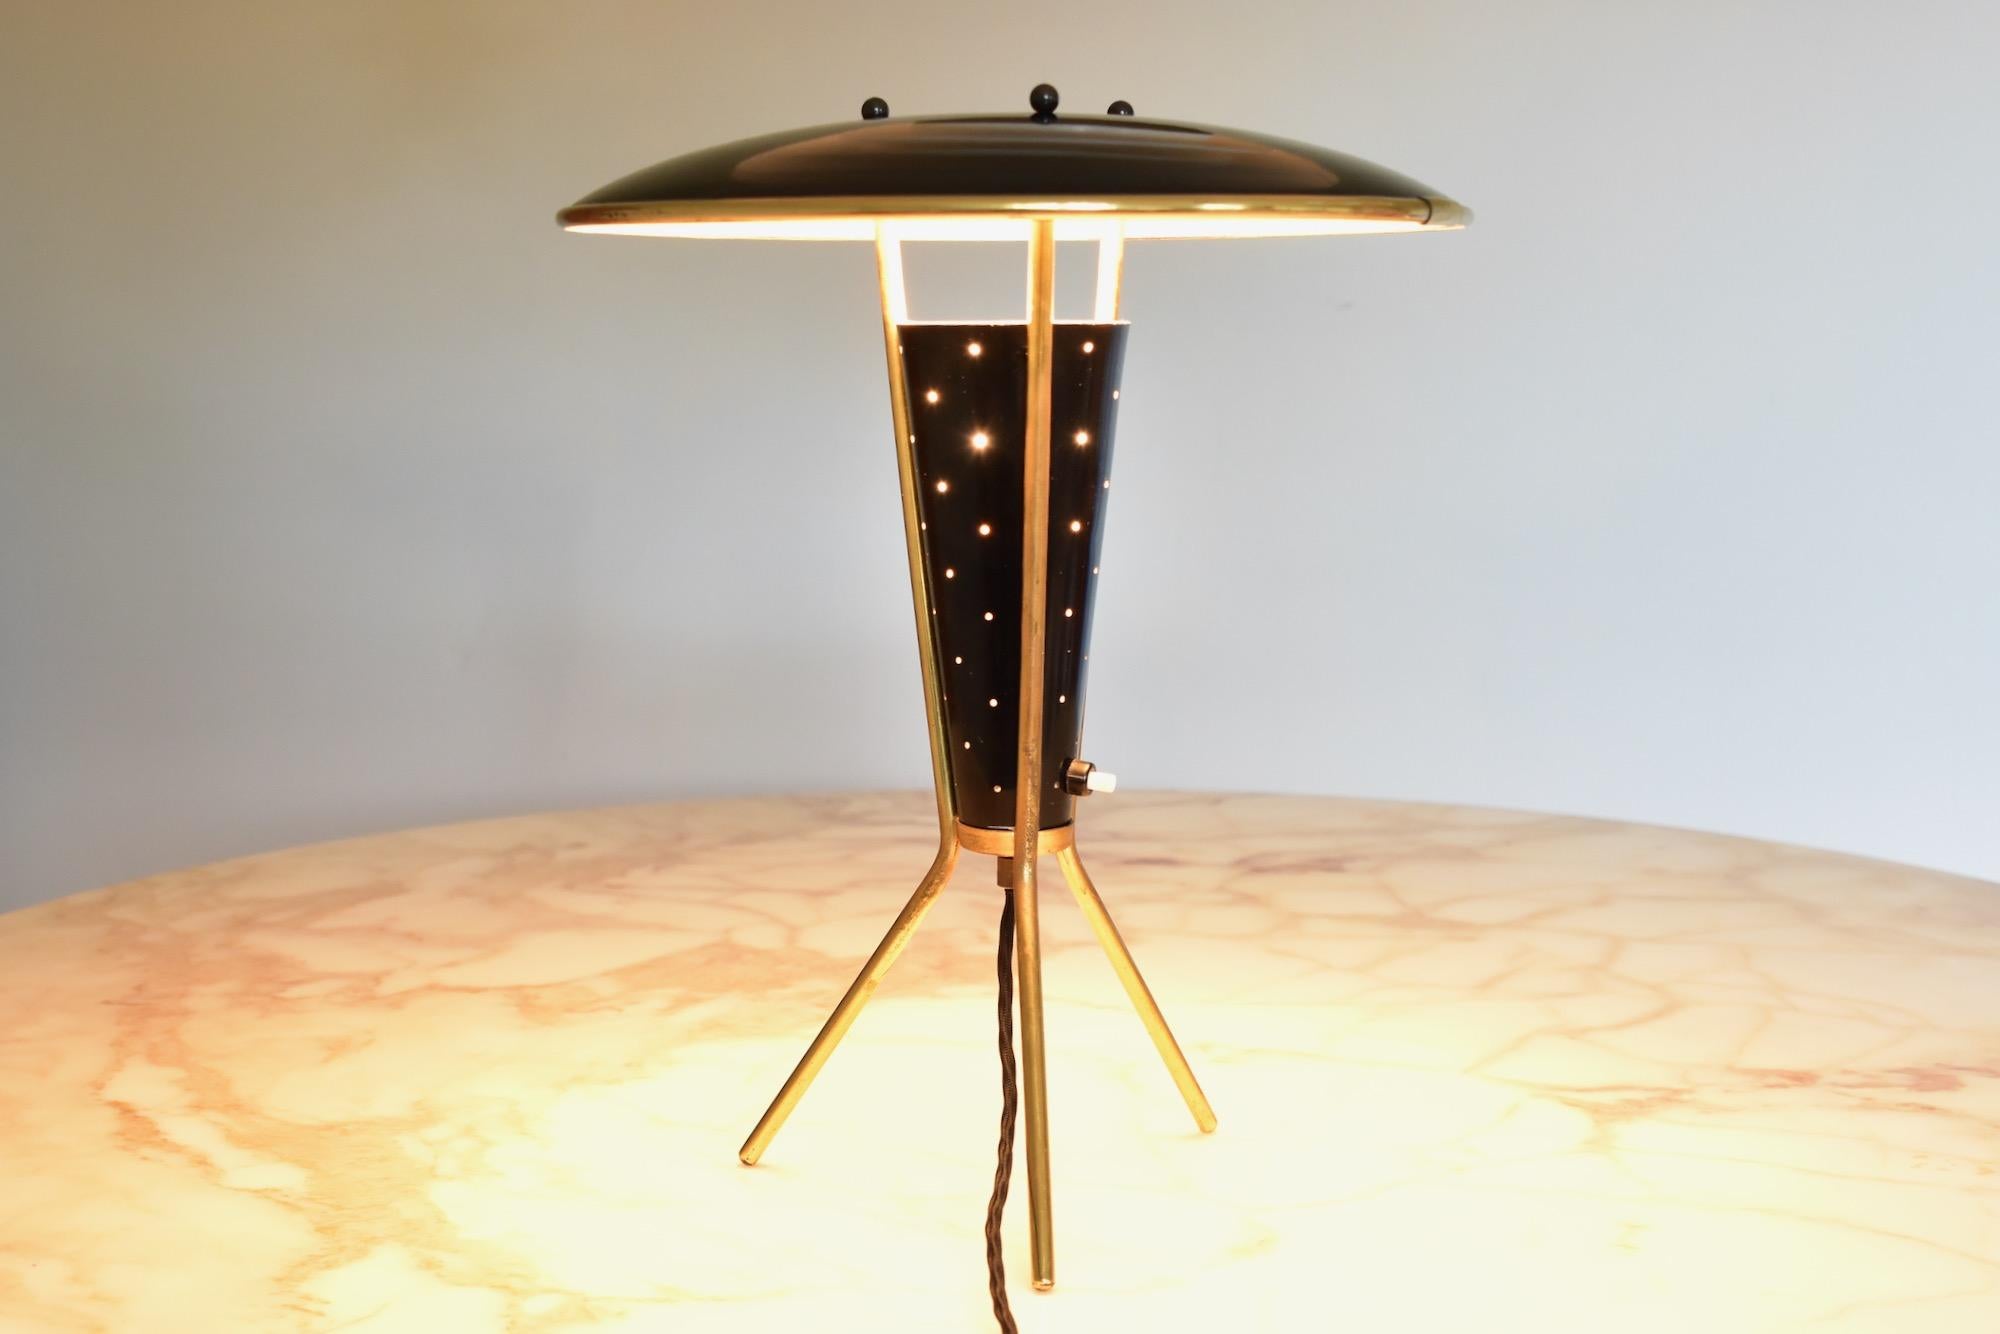 20th Century German Brass Atomic Tripod Table Lamp 1960's with Perforated Shade